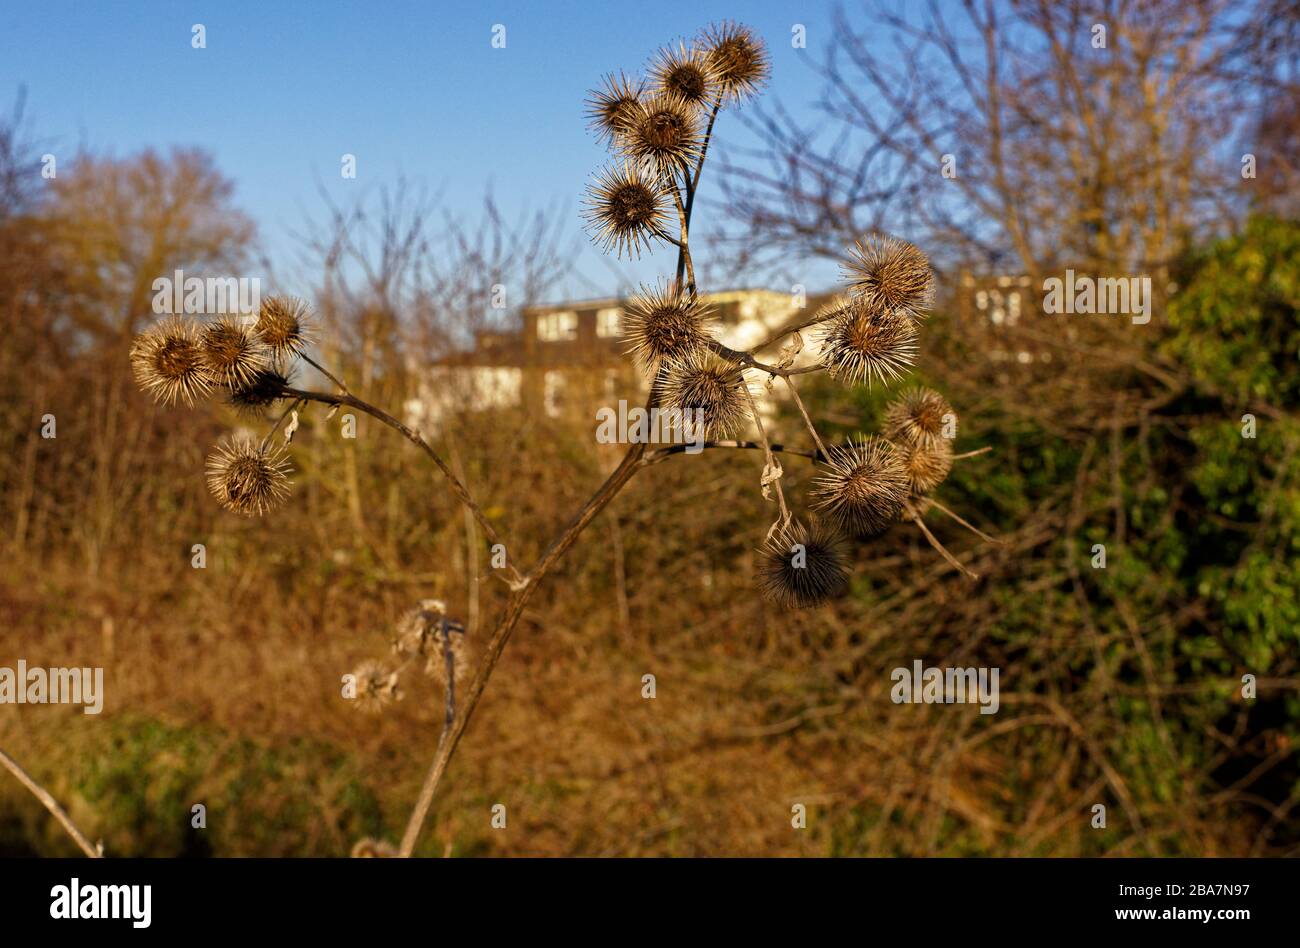 The hooked burrs of the head of the Lesser Burdock give it the name sticky bob, against a blue sky Stock Photo